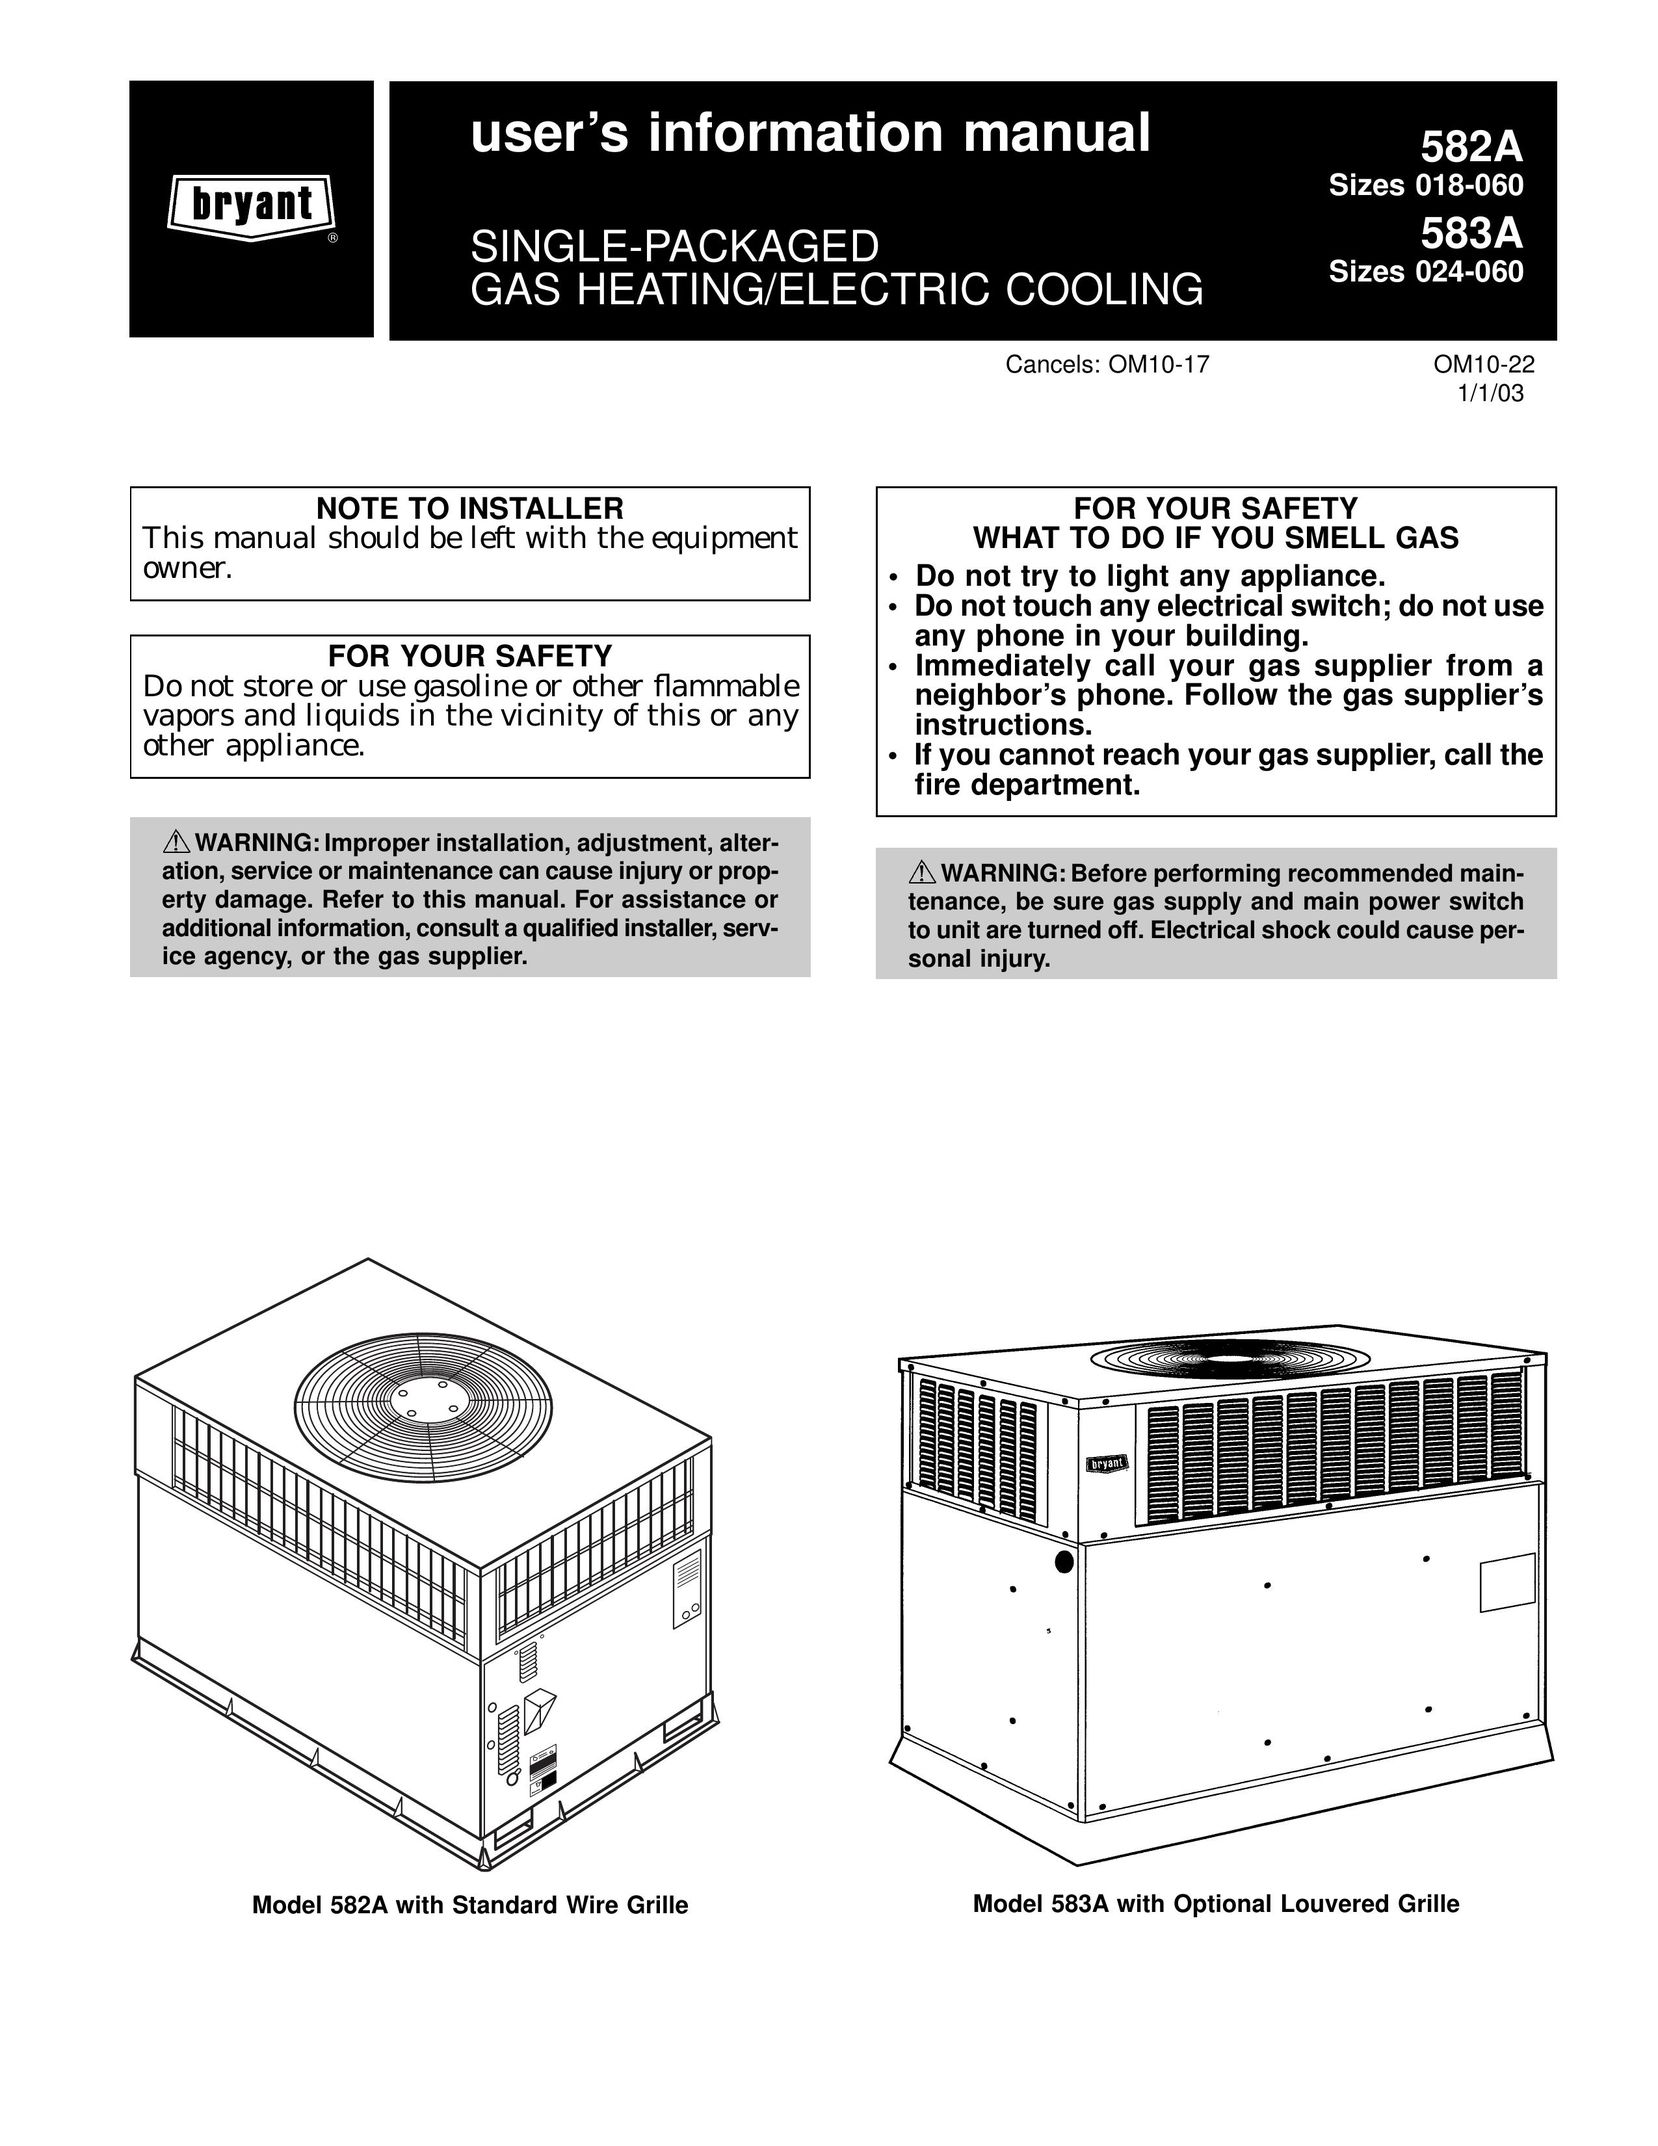 Bryant 583A Gas Heater User Manual